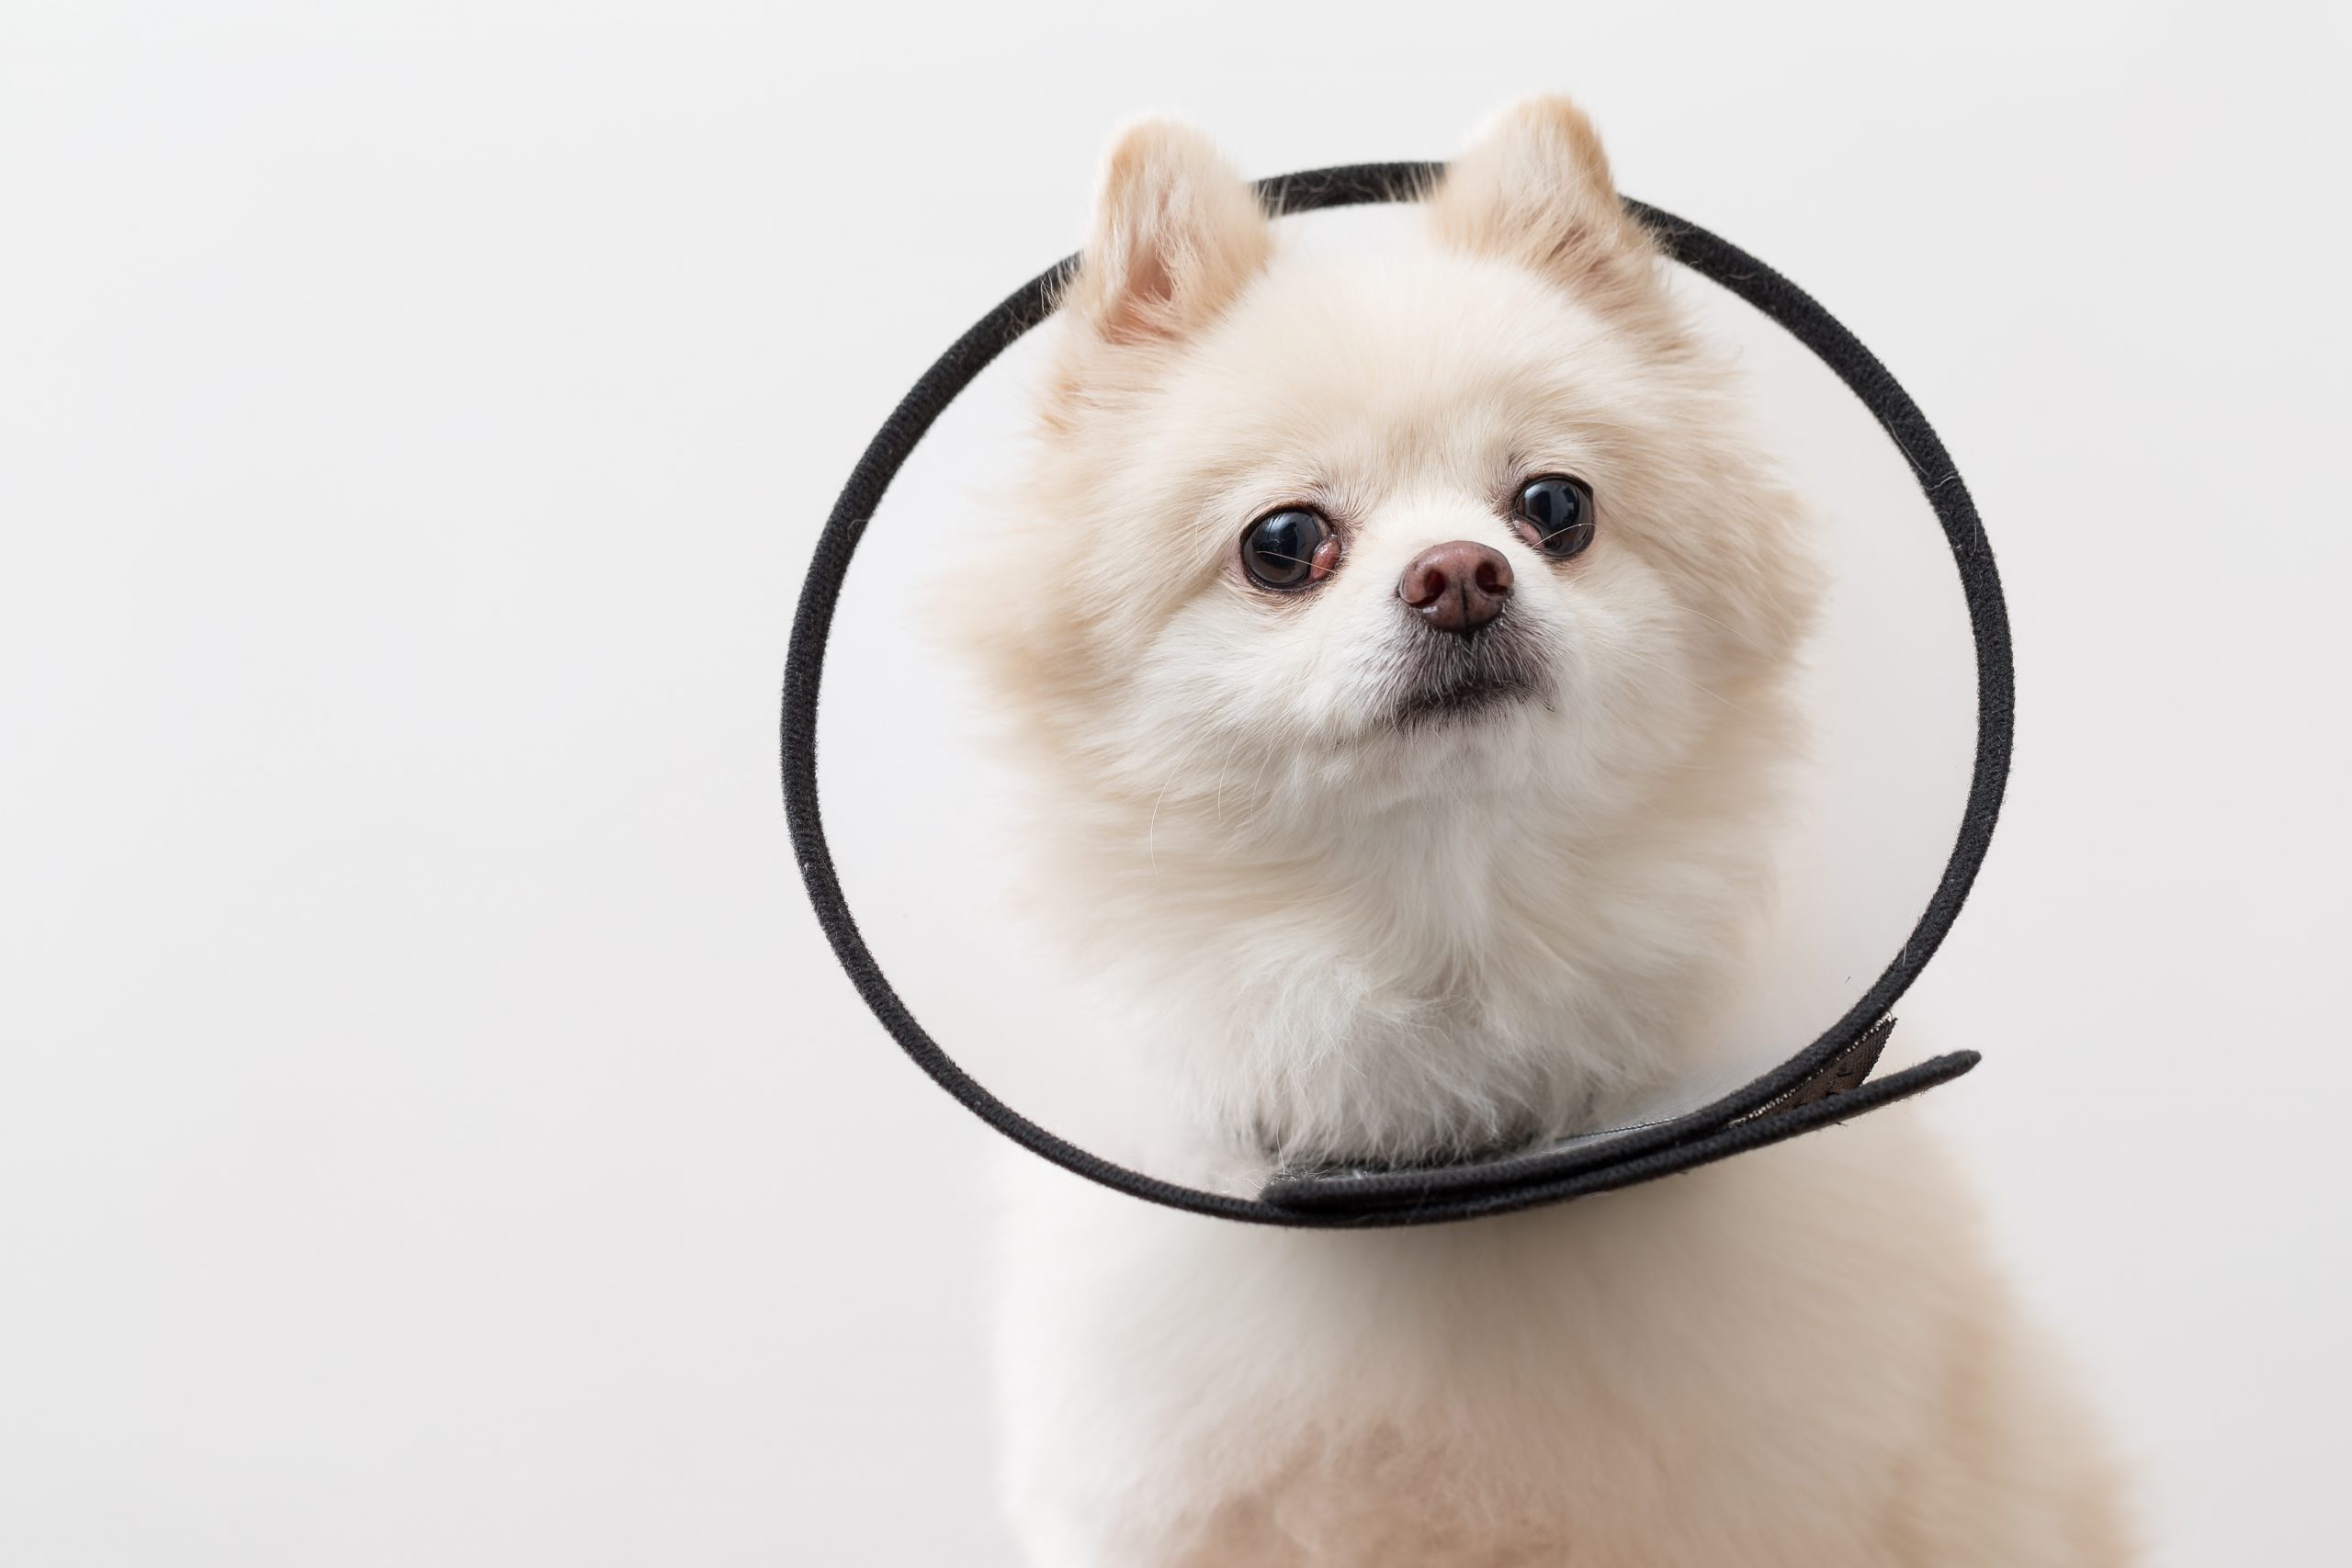 How long does a male dog have to wear the cone after neutering?